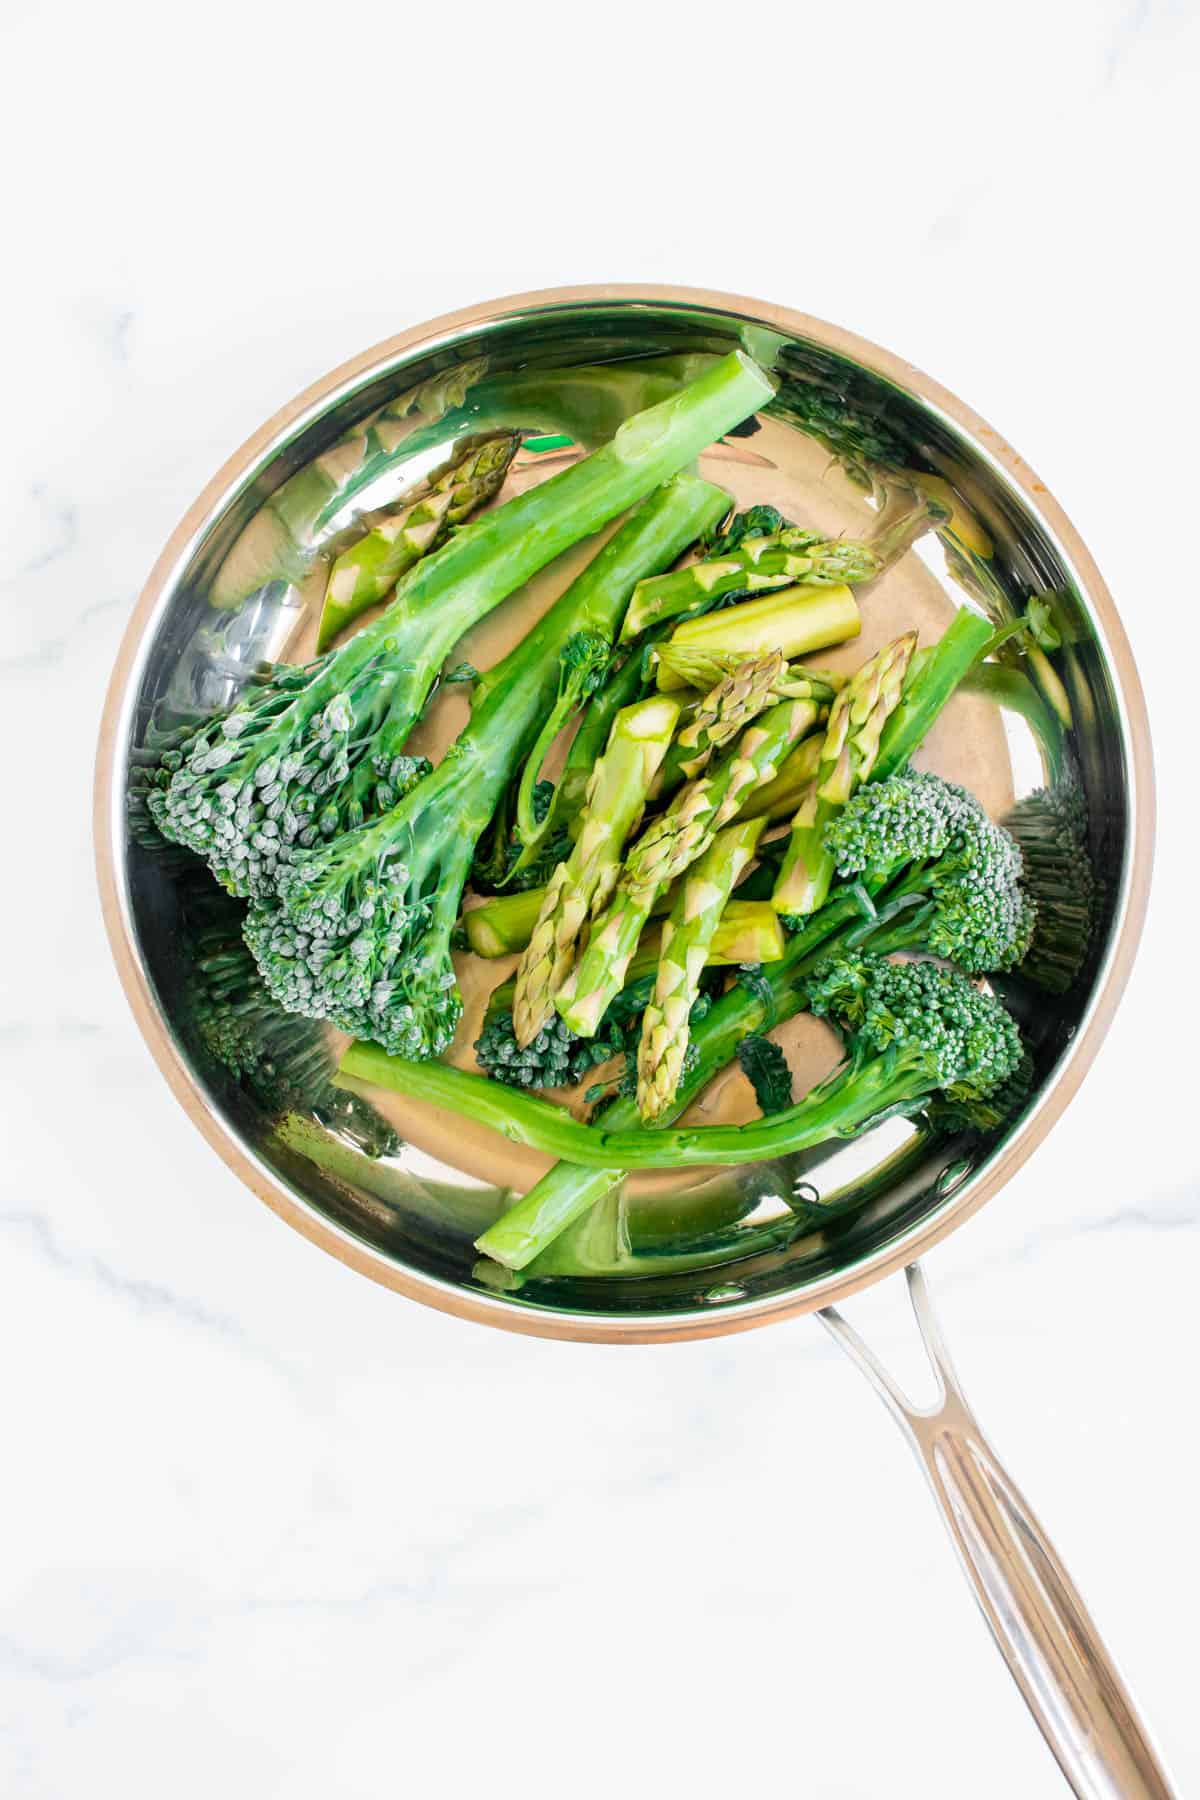 Raw broccolini and asparagus are in a silver skillet